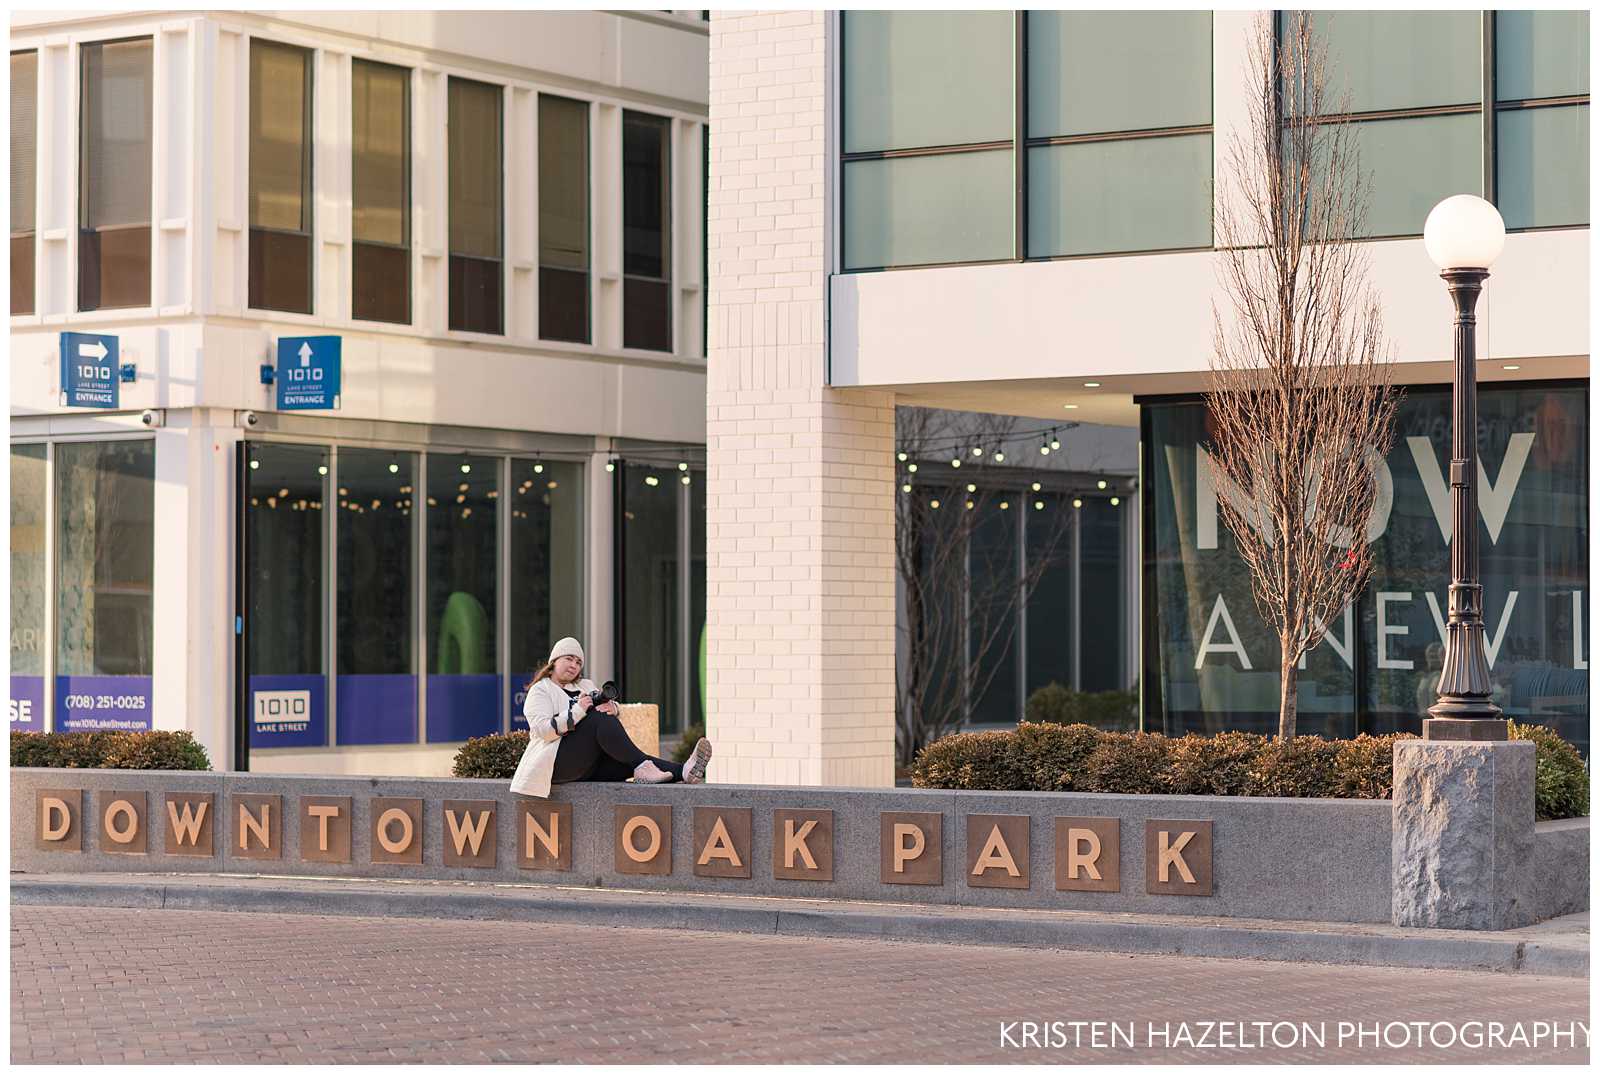 Tina Harle sitting on a sign that says Downtown Oak Park